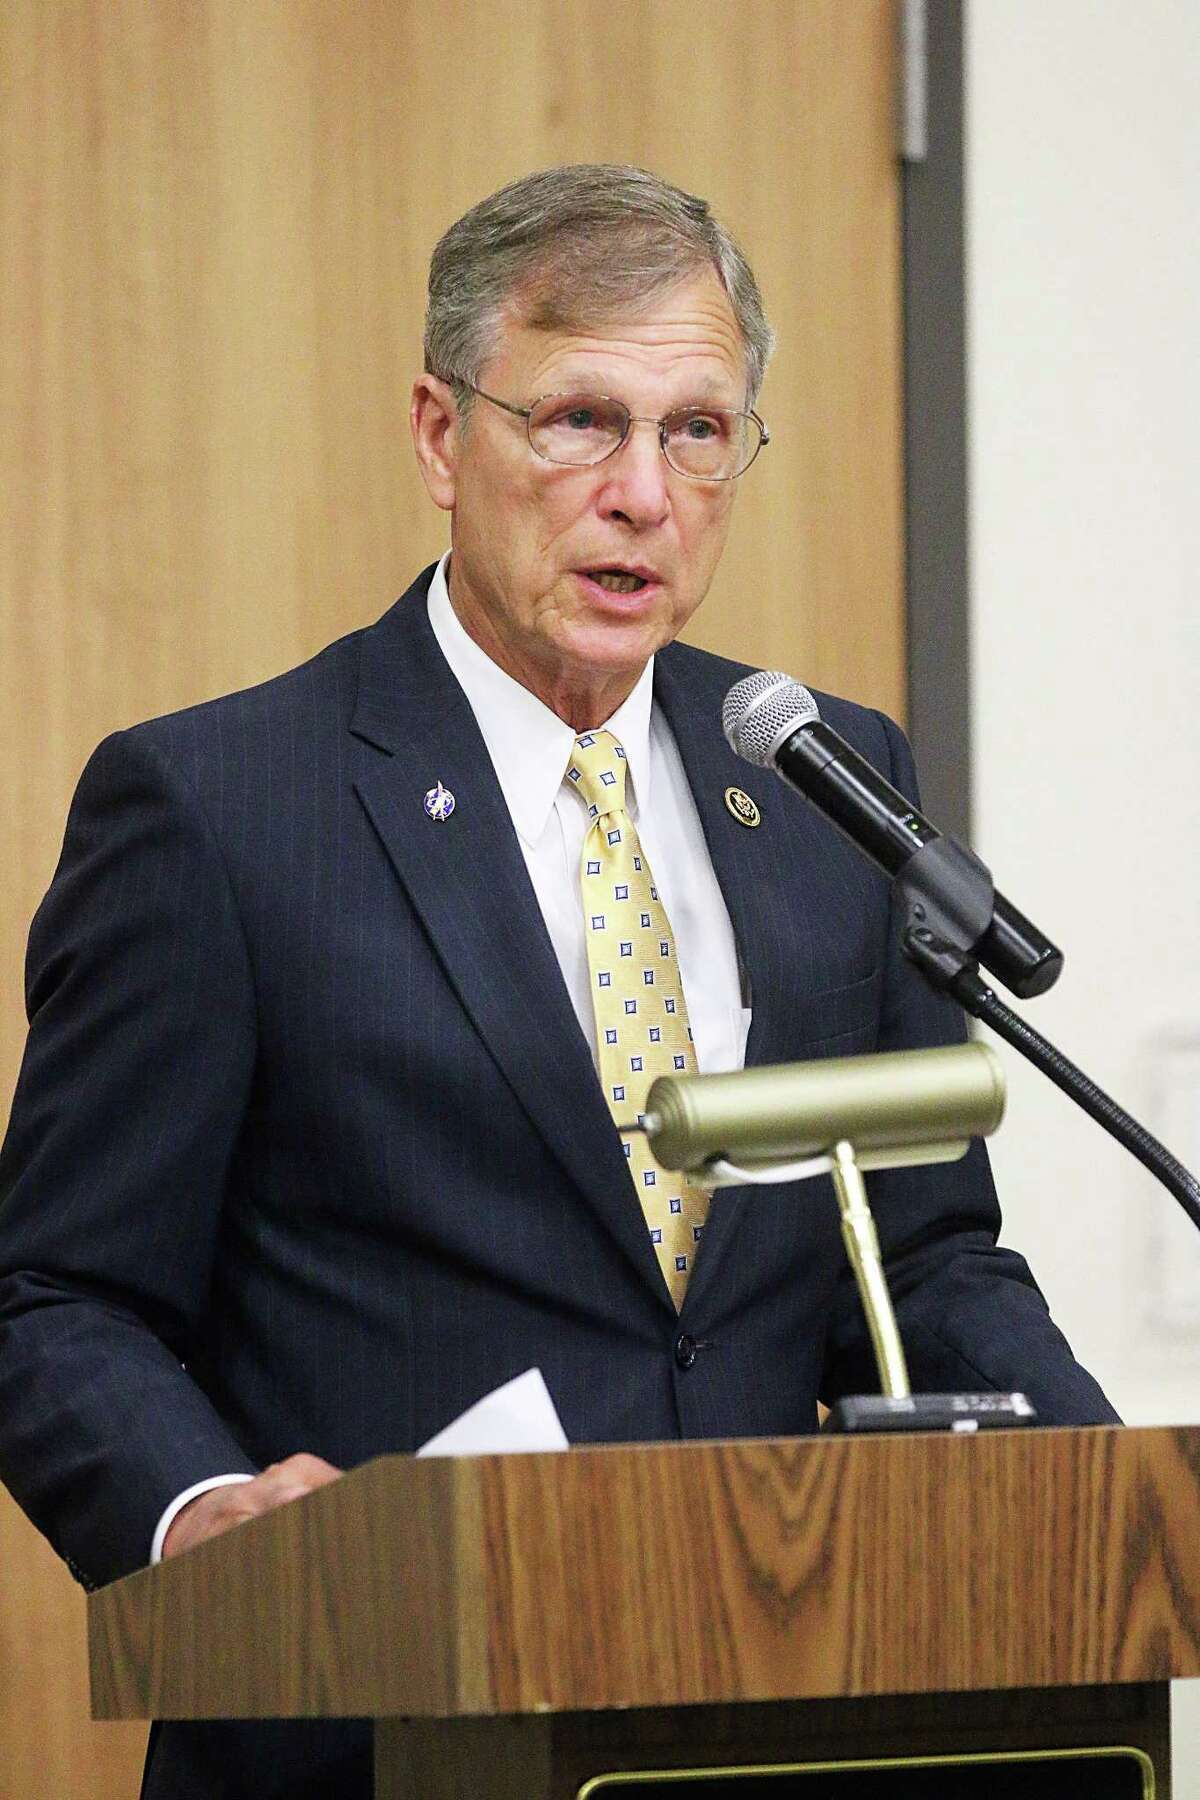 Congressman Dr. Brian Babin, R-Woodville, spoke to the Dayton Rotary Club recently at the Dayton Community Center. He is an Air Force veteran.